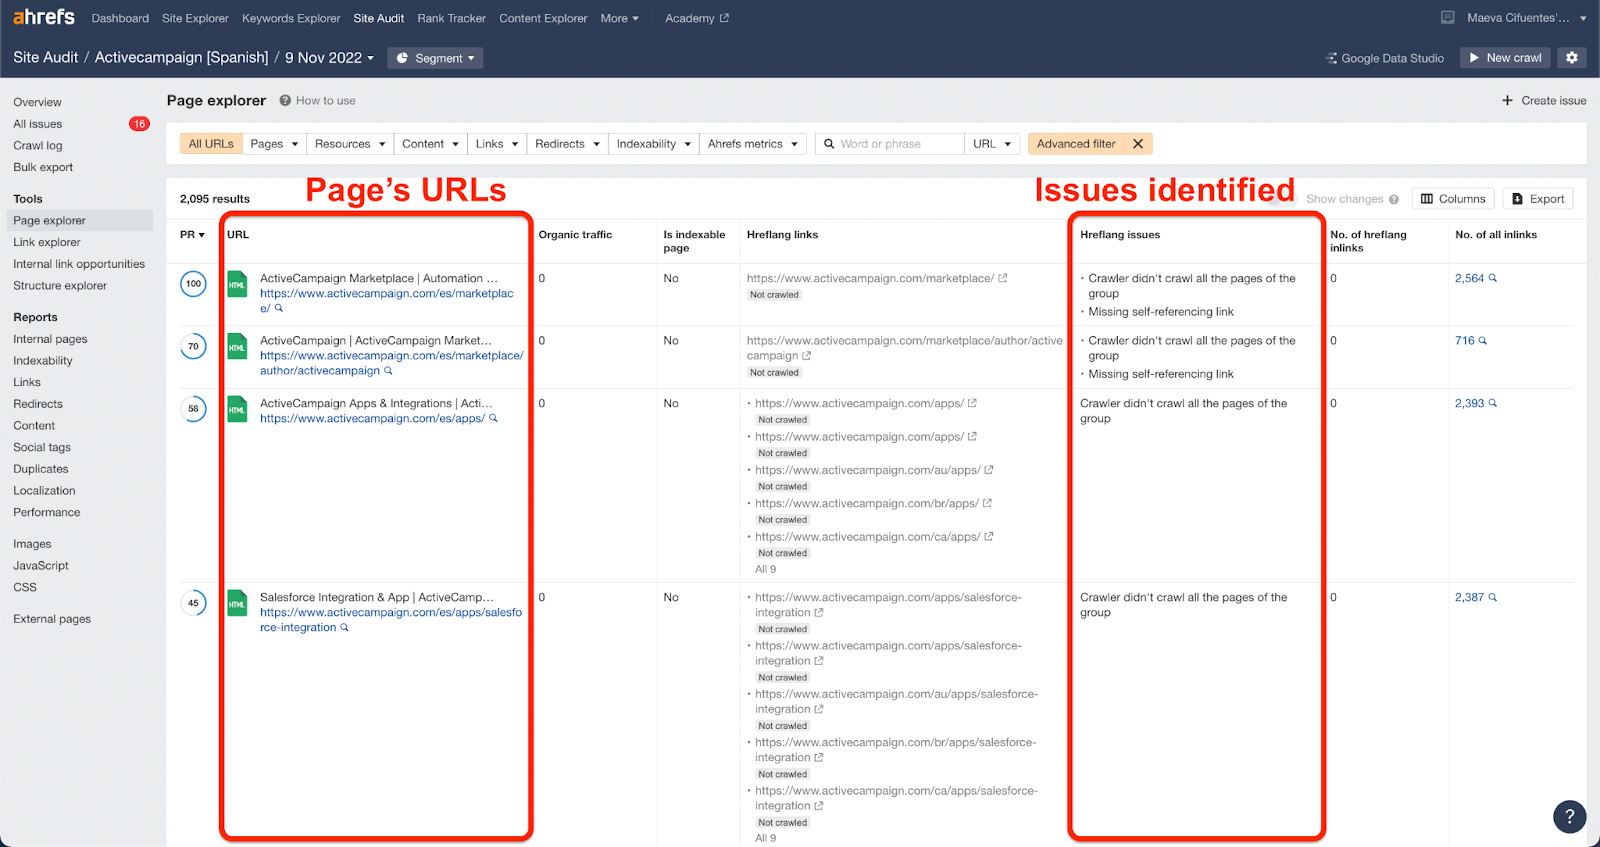 This screenshot helps you understand the error list and where to easily spot the hreflang tags issues identified